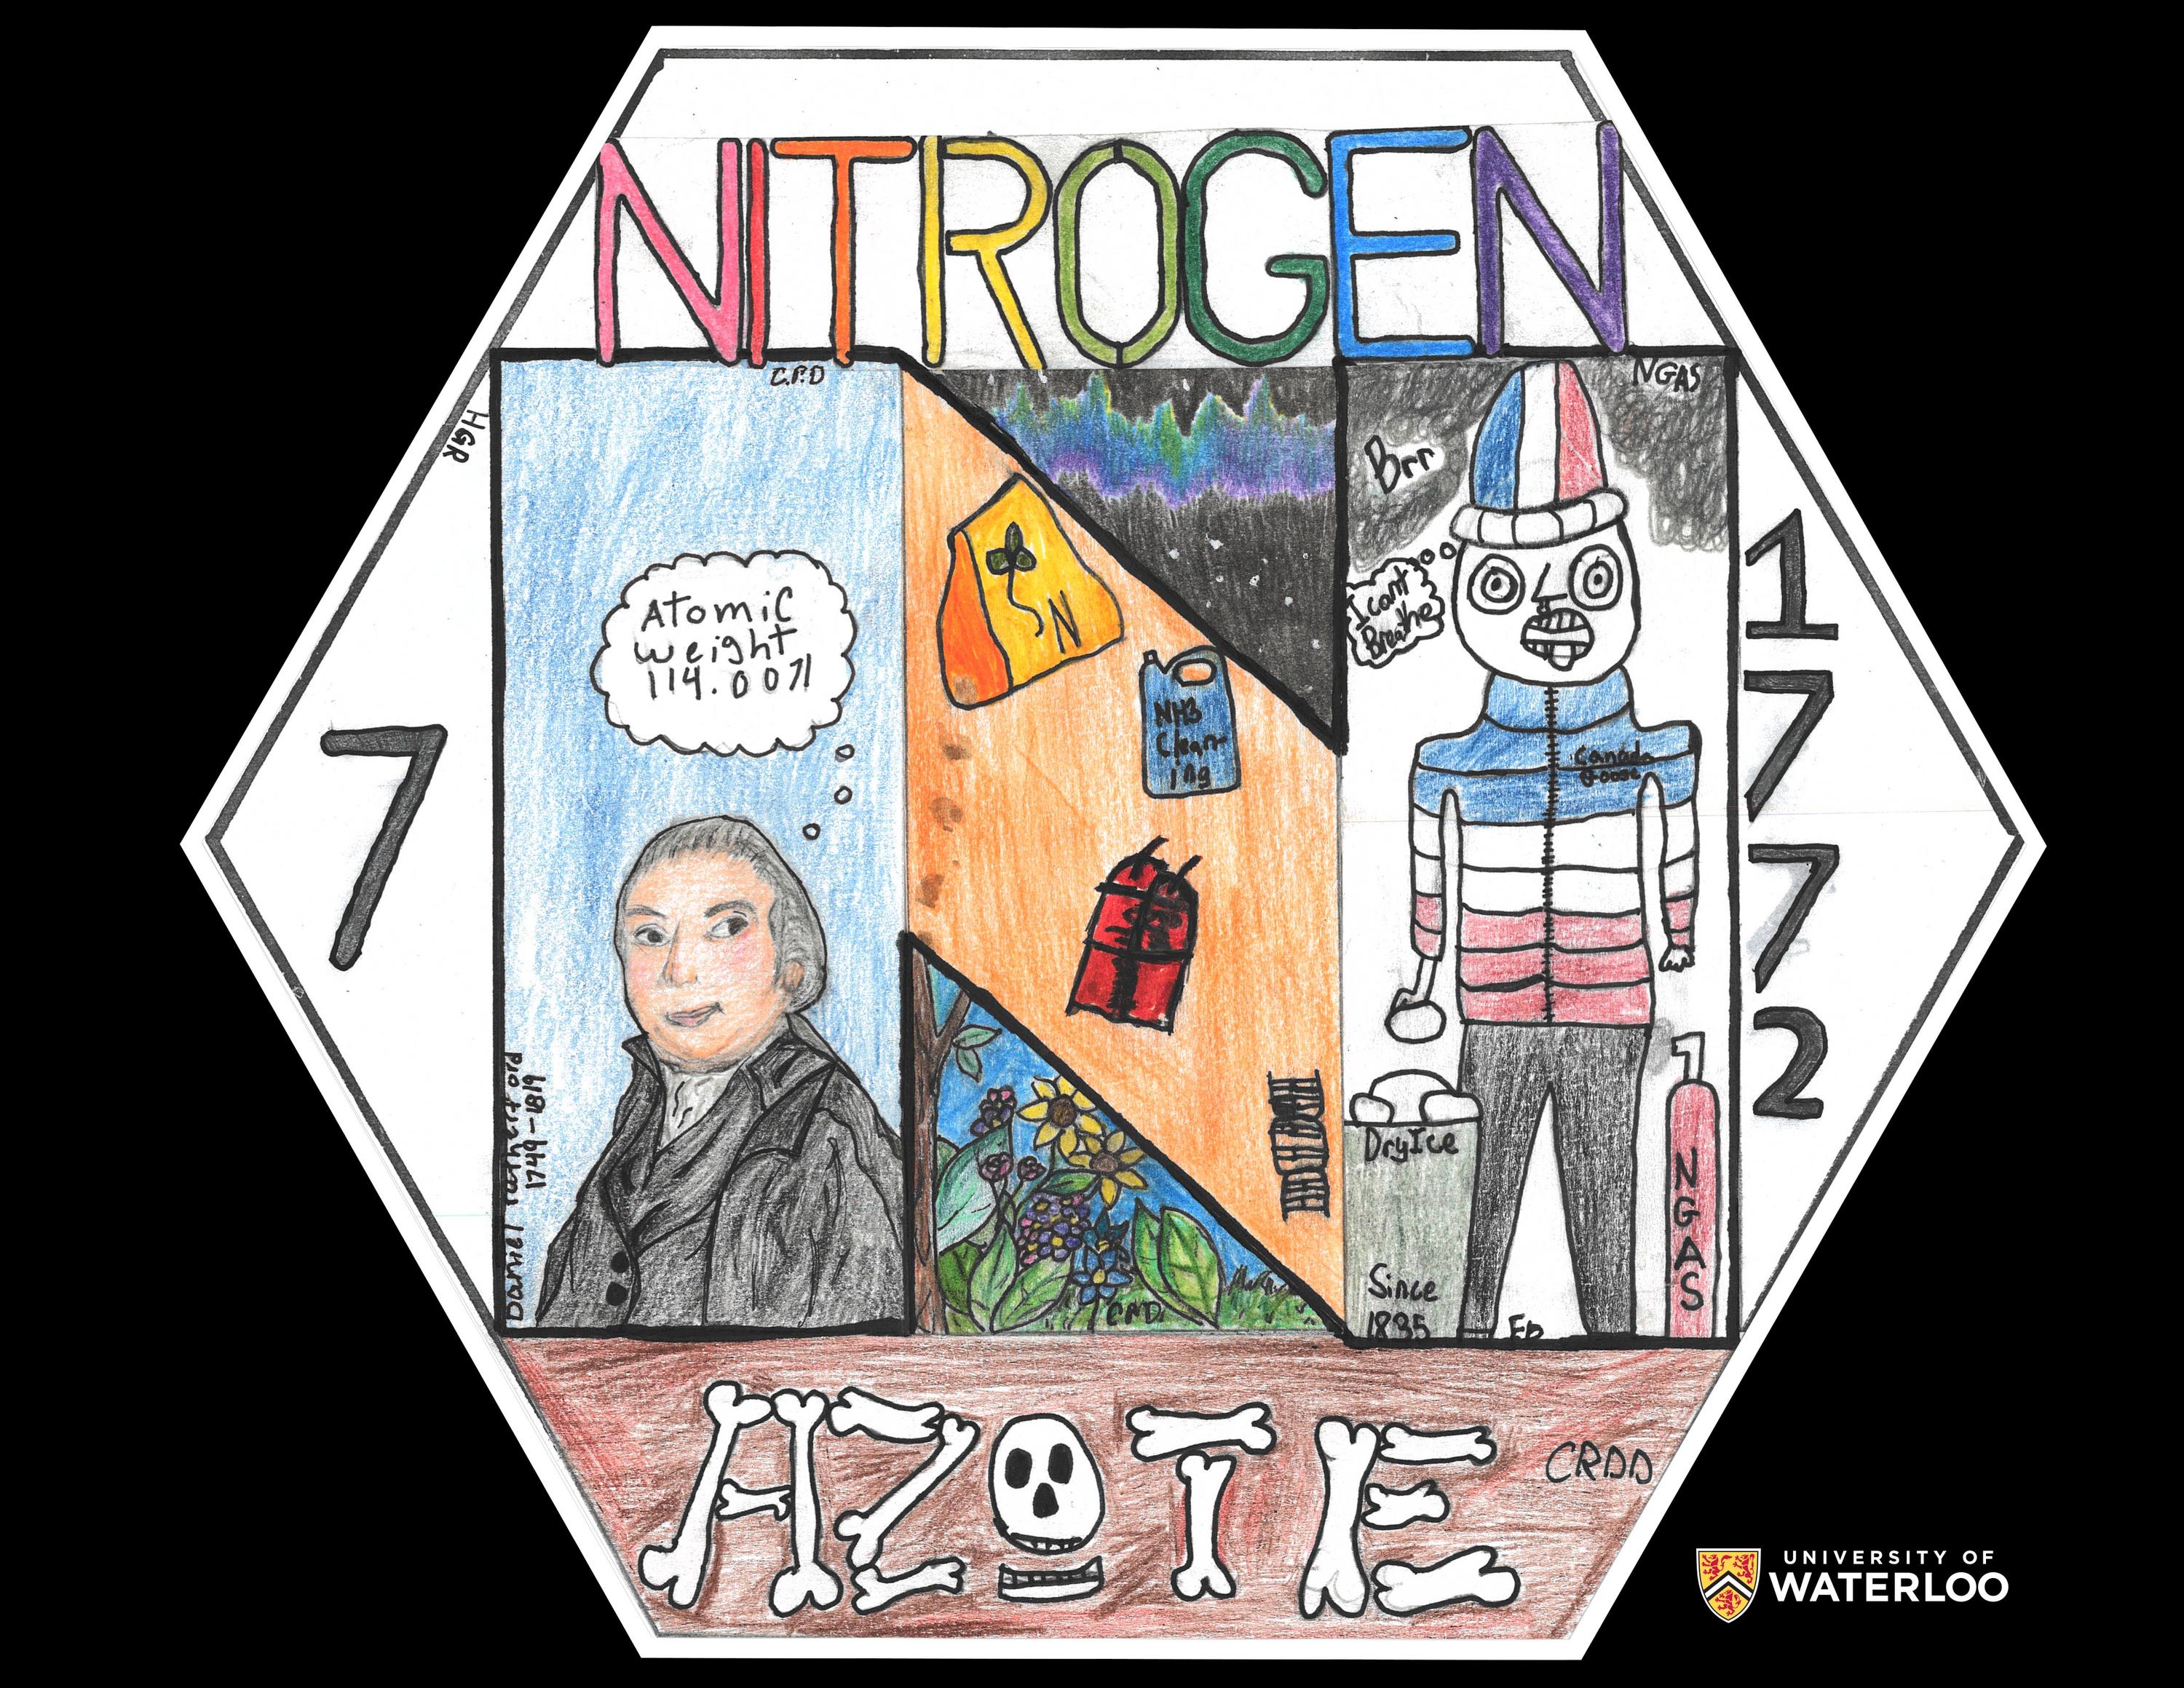  soil, DNA, and the auroras; right, a man thinking “I can’t breath” carrying containers labelled “dry ice - since 1895” and “N gas”. Surrounding illustrations of the words “Nitrogen”, 7, “Azote” spelled in skull and bones,” and 1772.